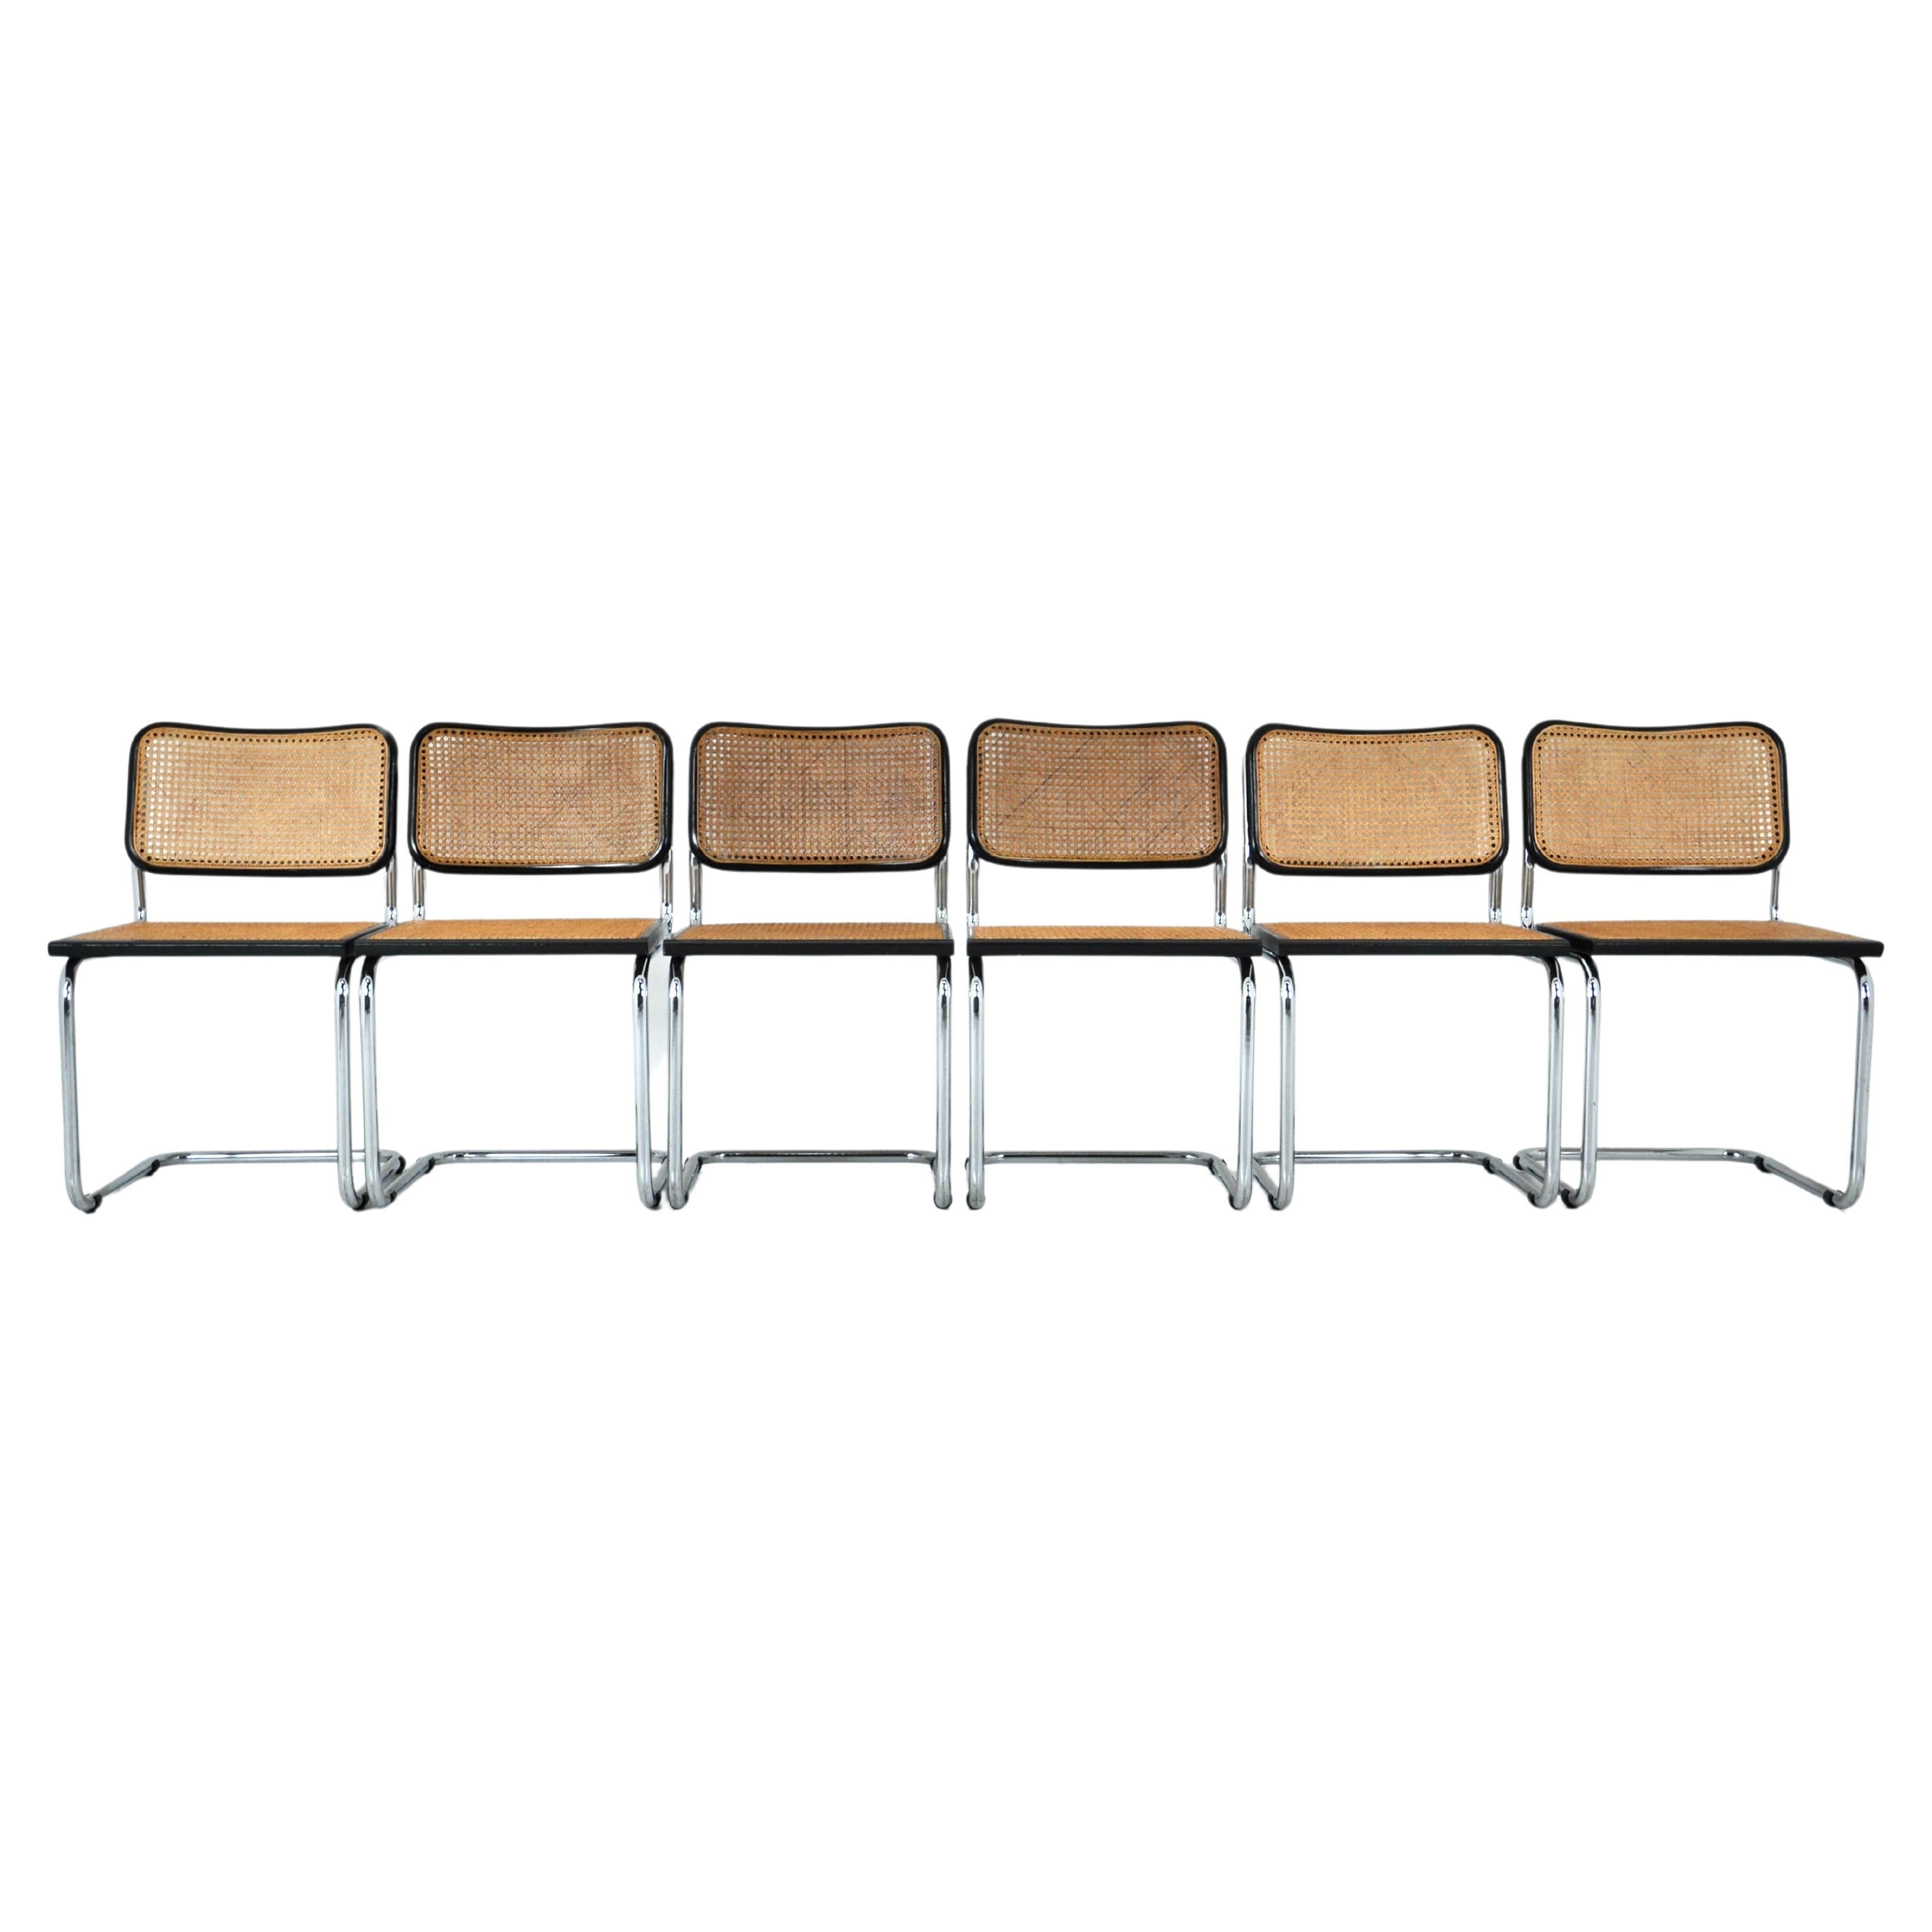 Dining Chairs Style B32 by Marcel Breuer, set of 6